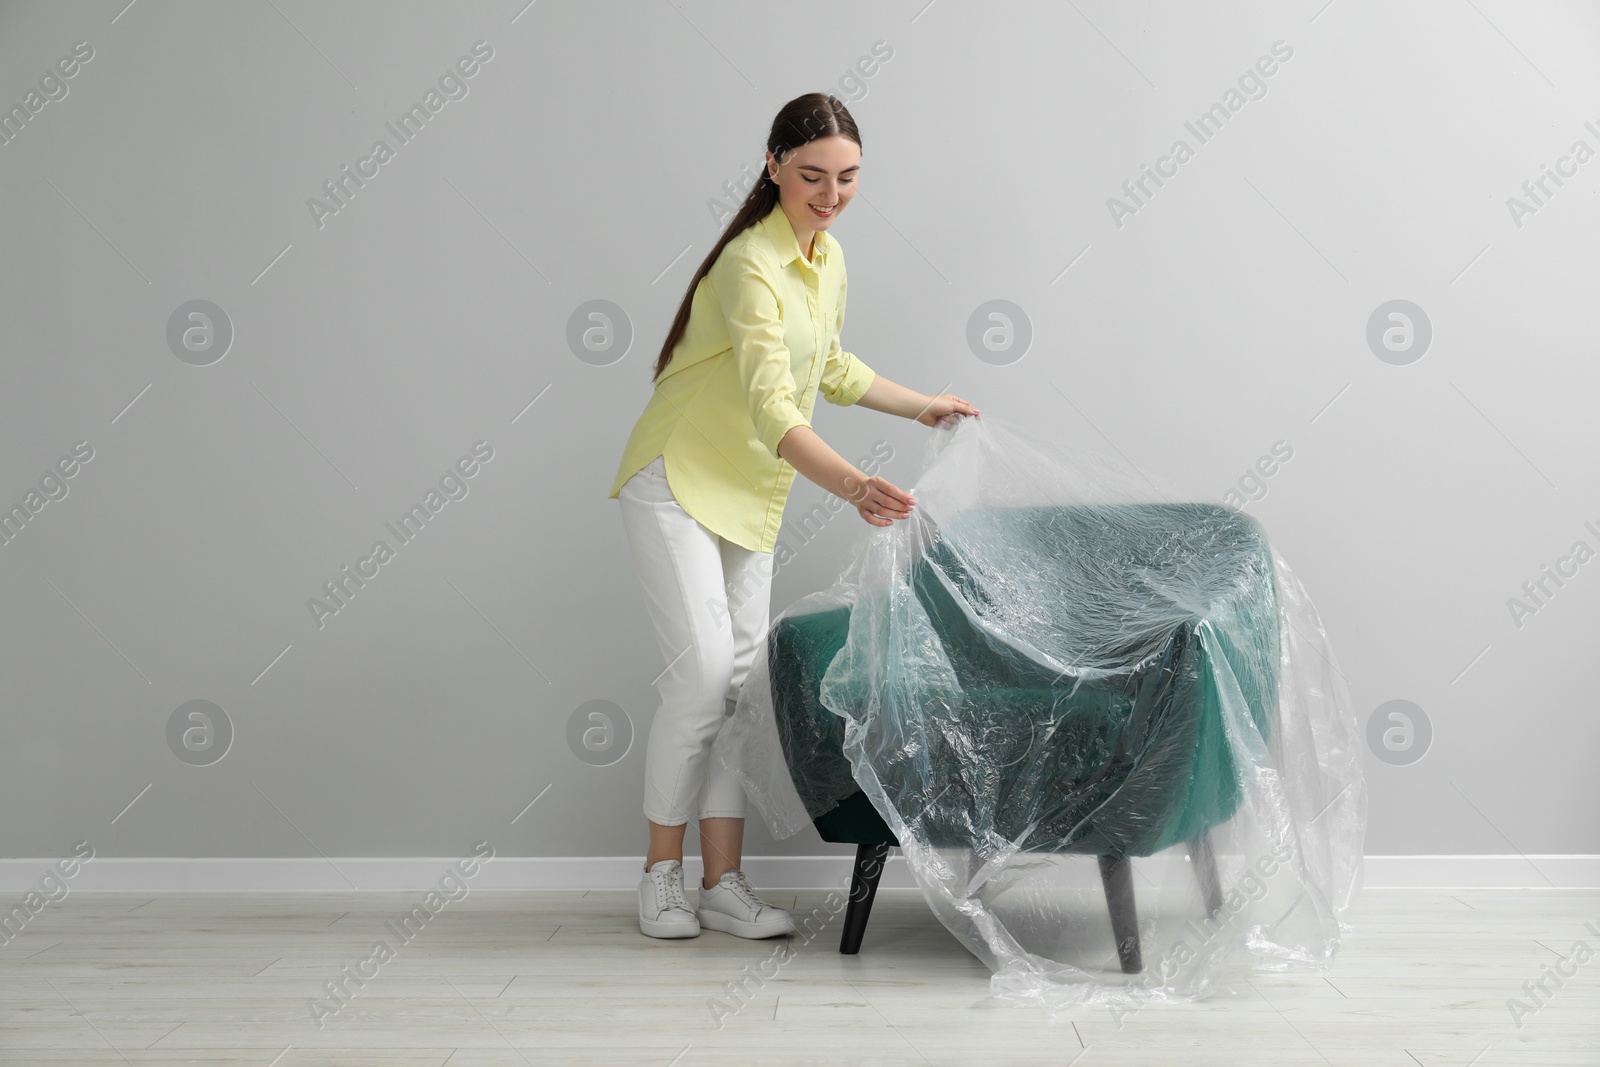 Photo of Young woman putting plastic film away from armchair near light grey wall indoors